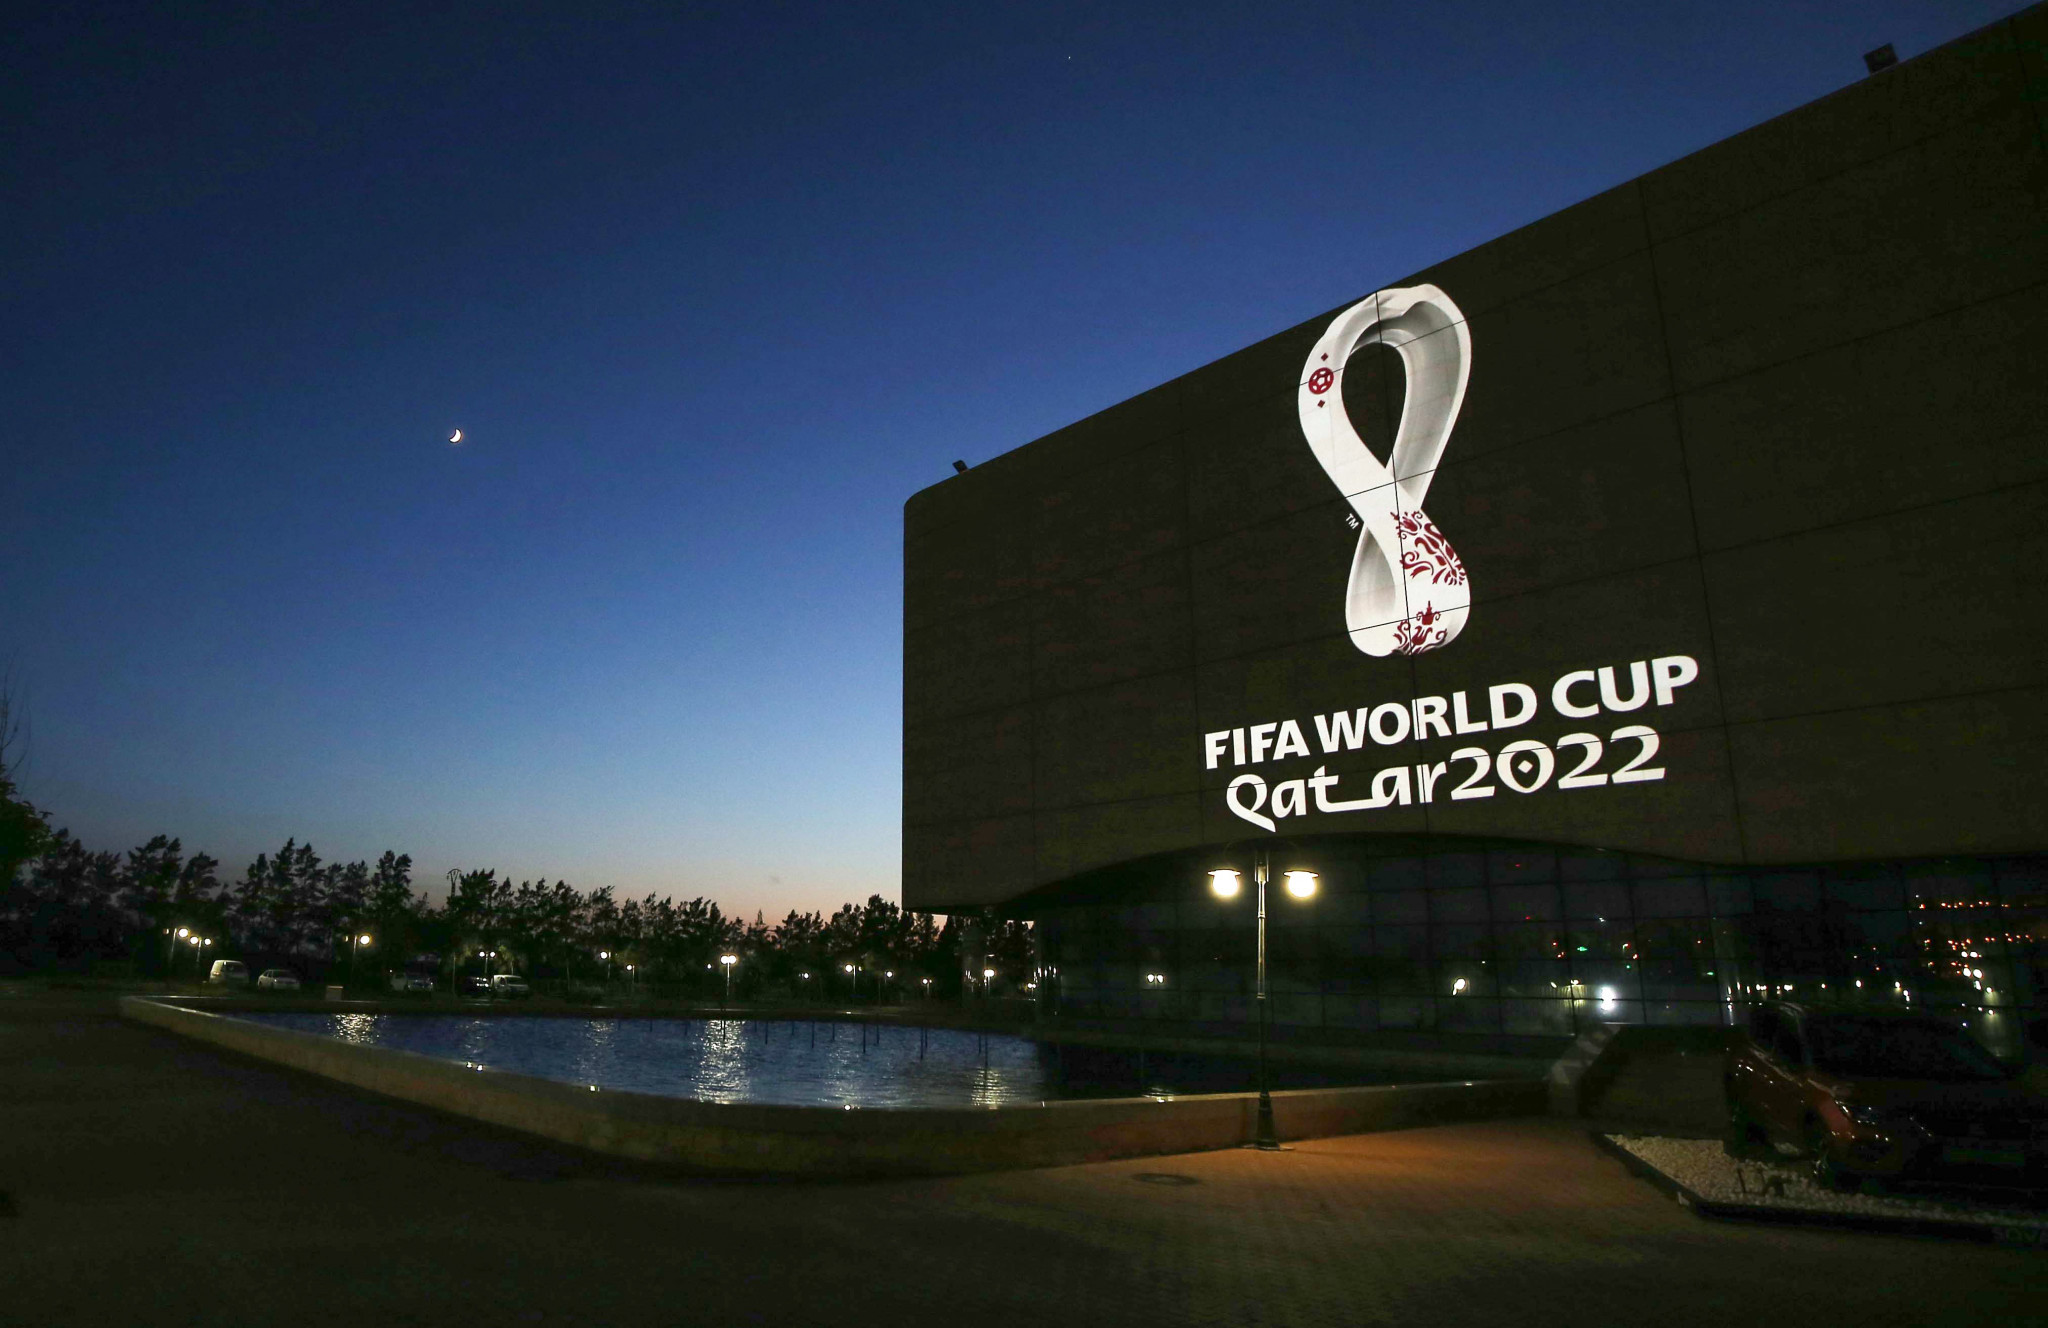 Two rounds of qualifying fixtures for the 2022 FIFA World Cup have been postponed by the AFC ©Getty Images